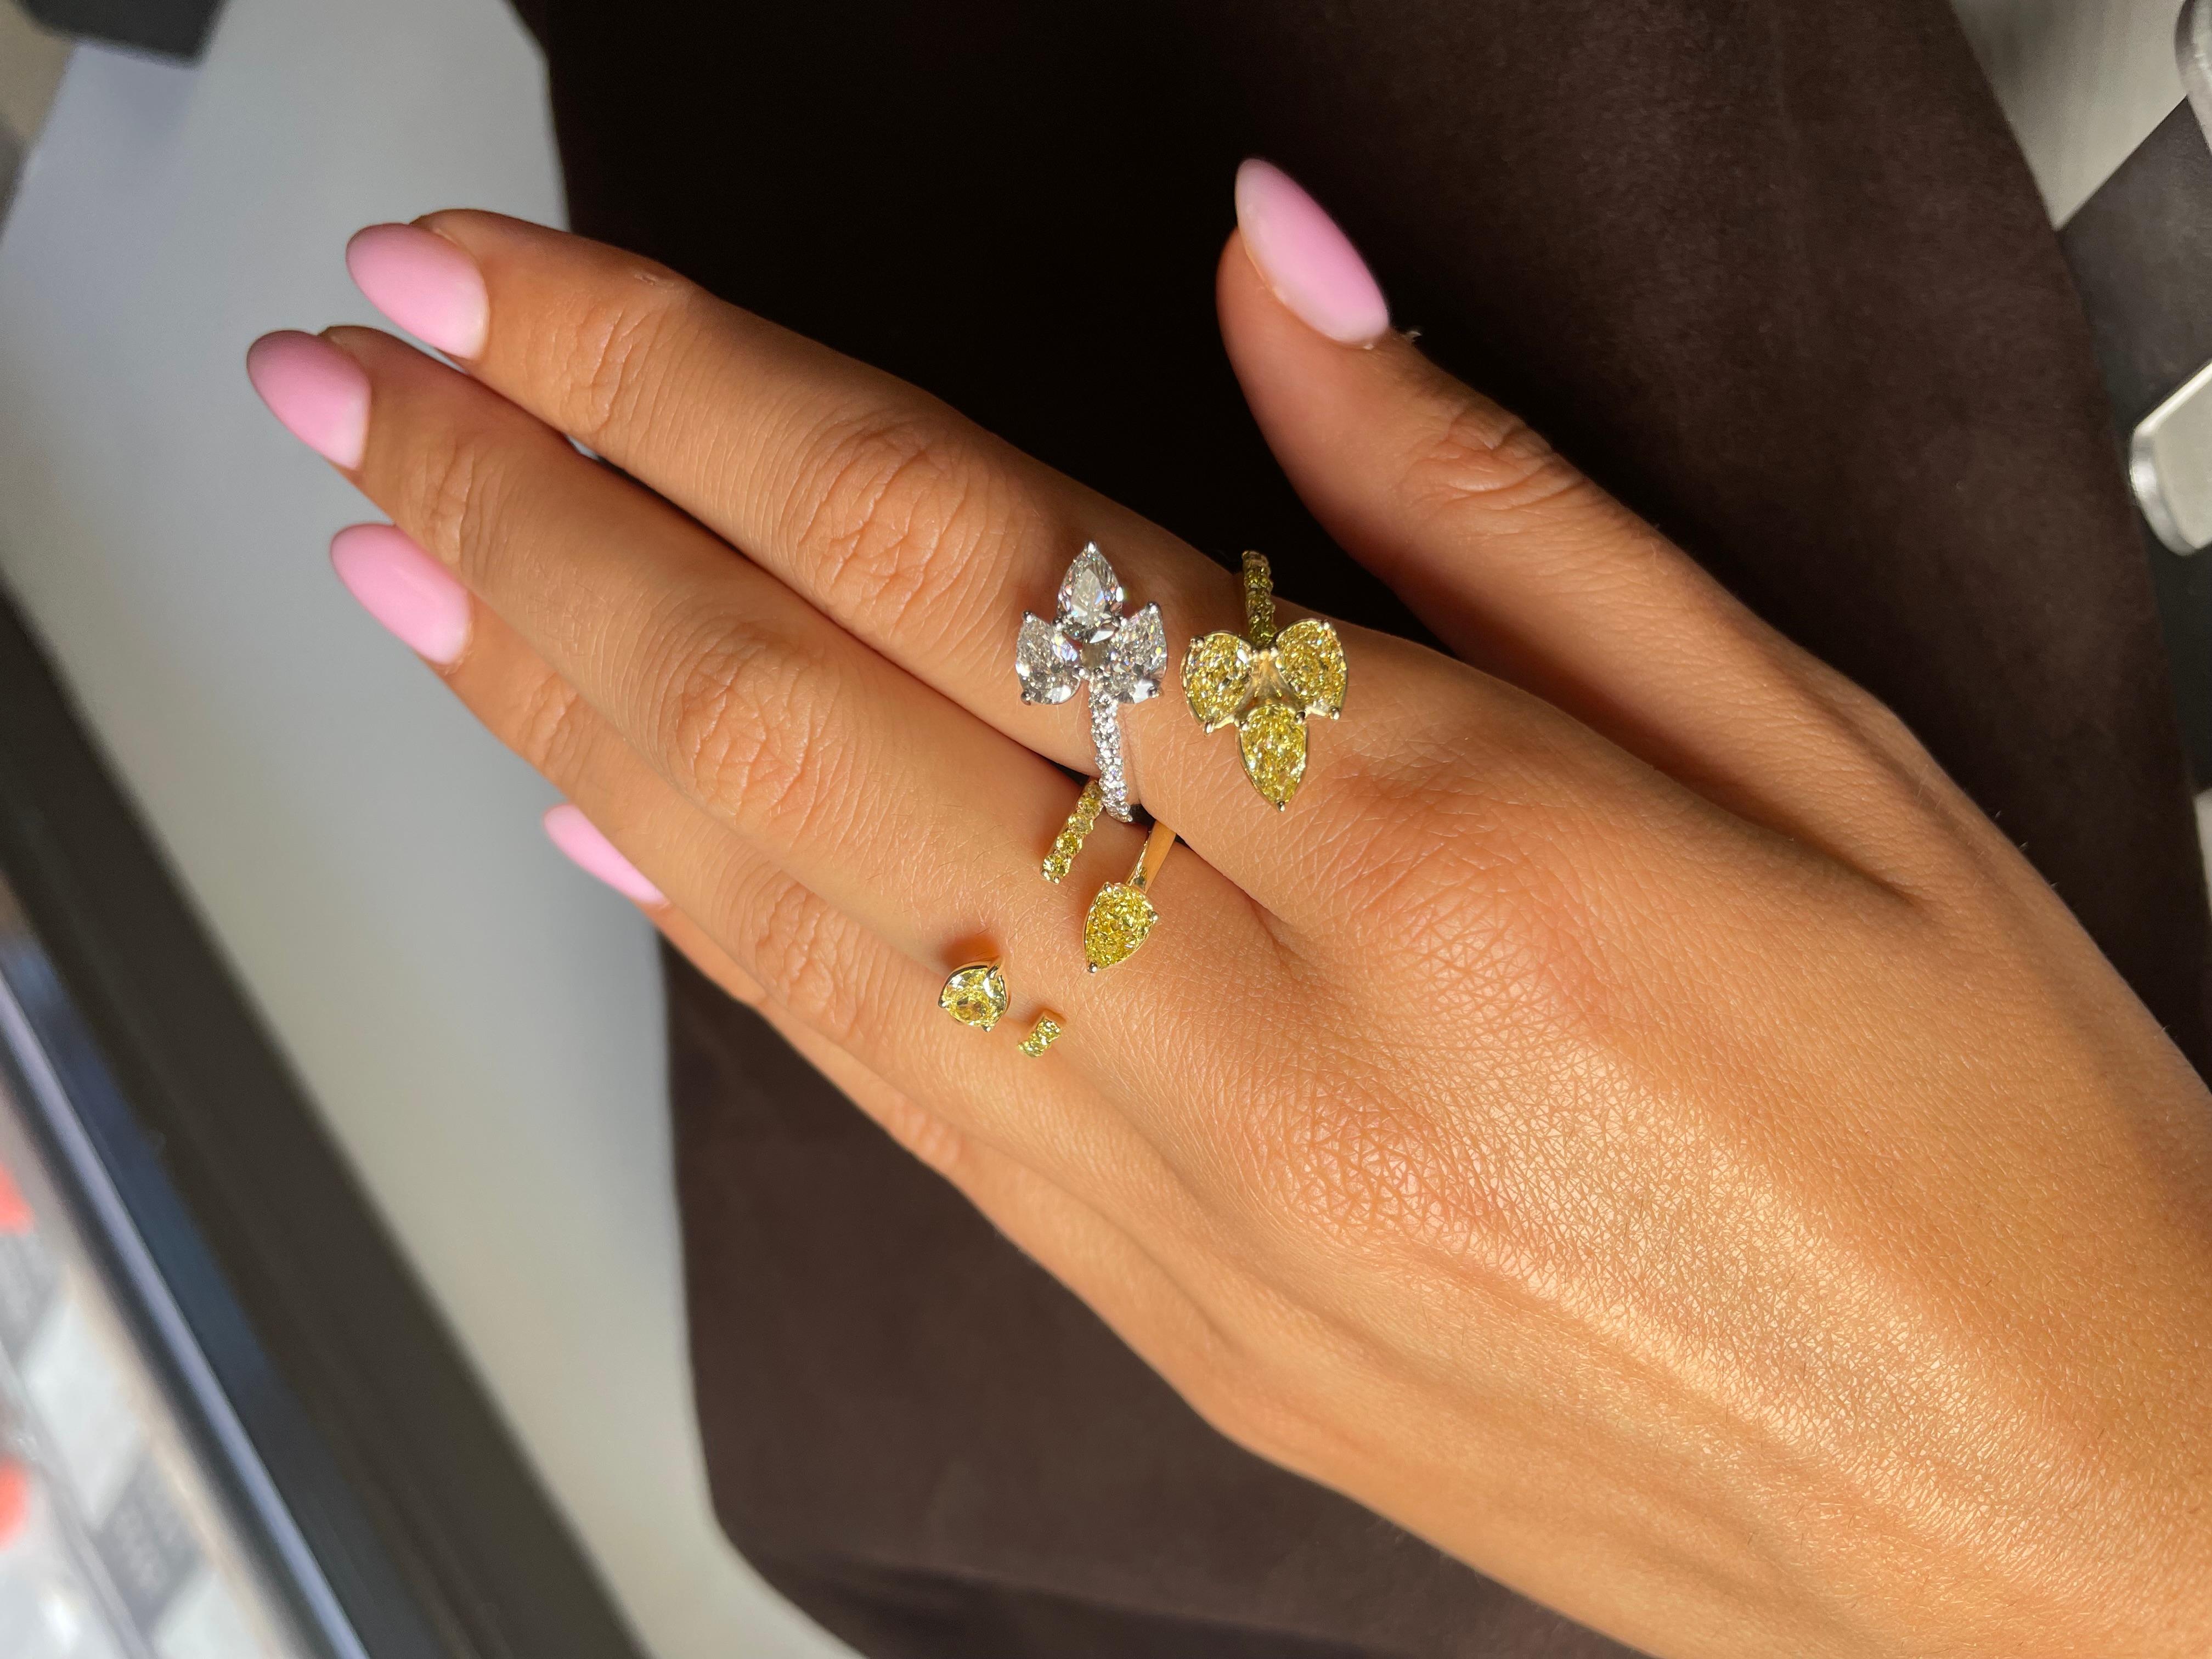 Featuring a unique Diamond Leaf Bypass Ring.  showcasing a one-of-a-kind design. Adorned with 3 pear-shaped Yellow Diamonds, totaling 1.26 carats, and 3 pear-shaped Colorless Diamonds, totaling 1.20 carats, this ring is a true marvel. The